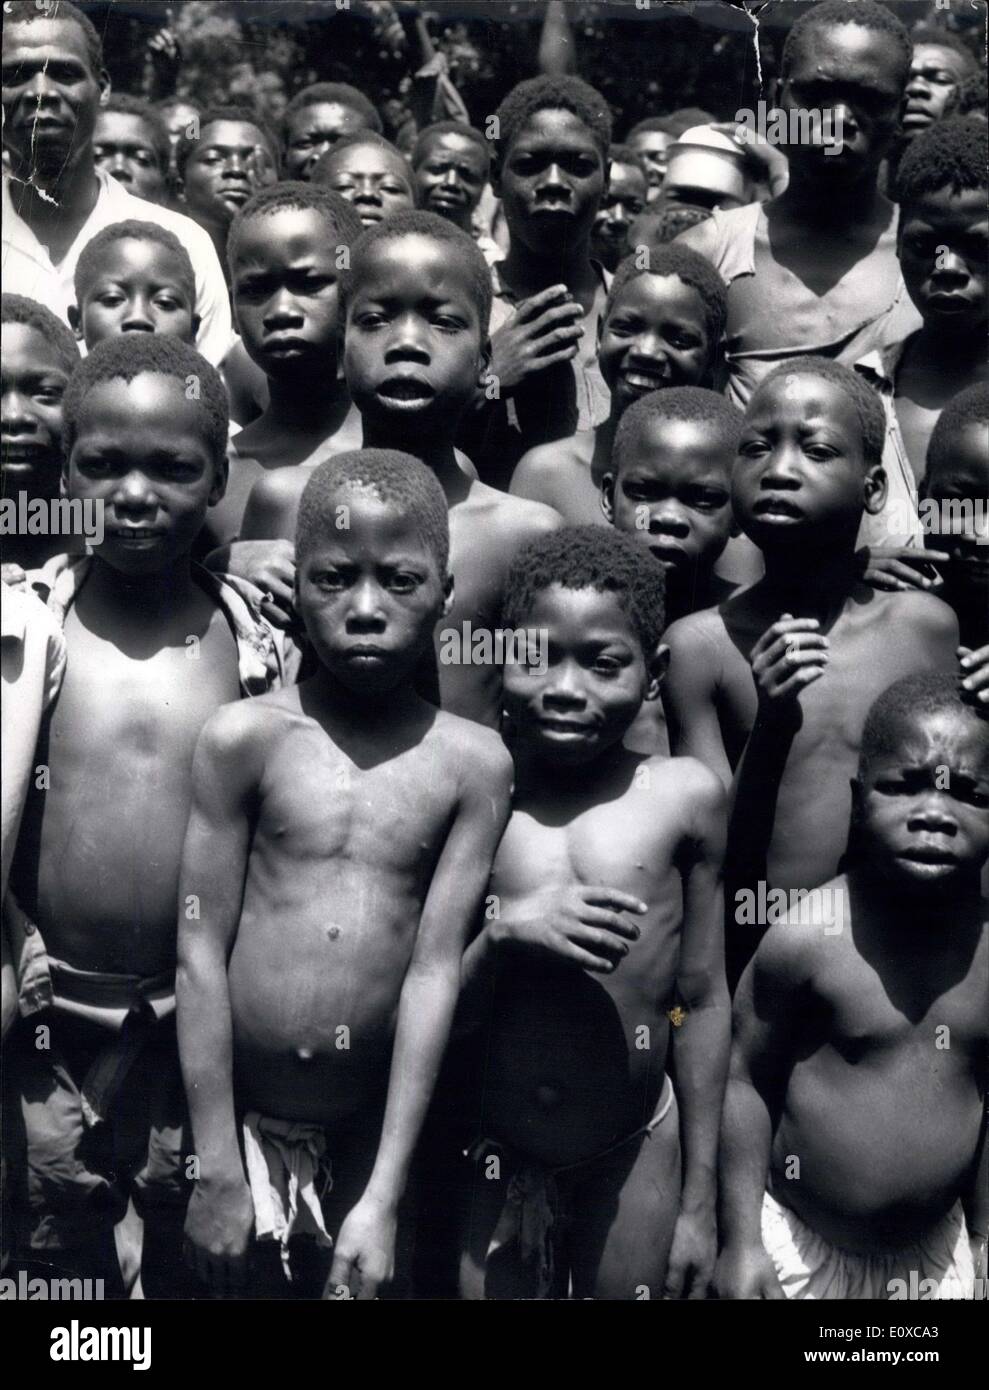 Mar. 27, 1966 - Sudanese refugees in Central African Republic - Need: Refugee children of the Zende tribe. Almost all are suffering from malnutrition and other diseases. Stock Photo